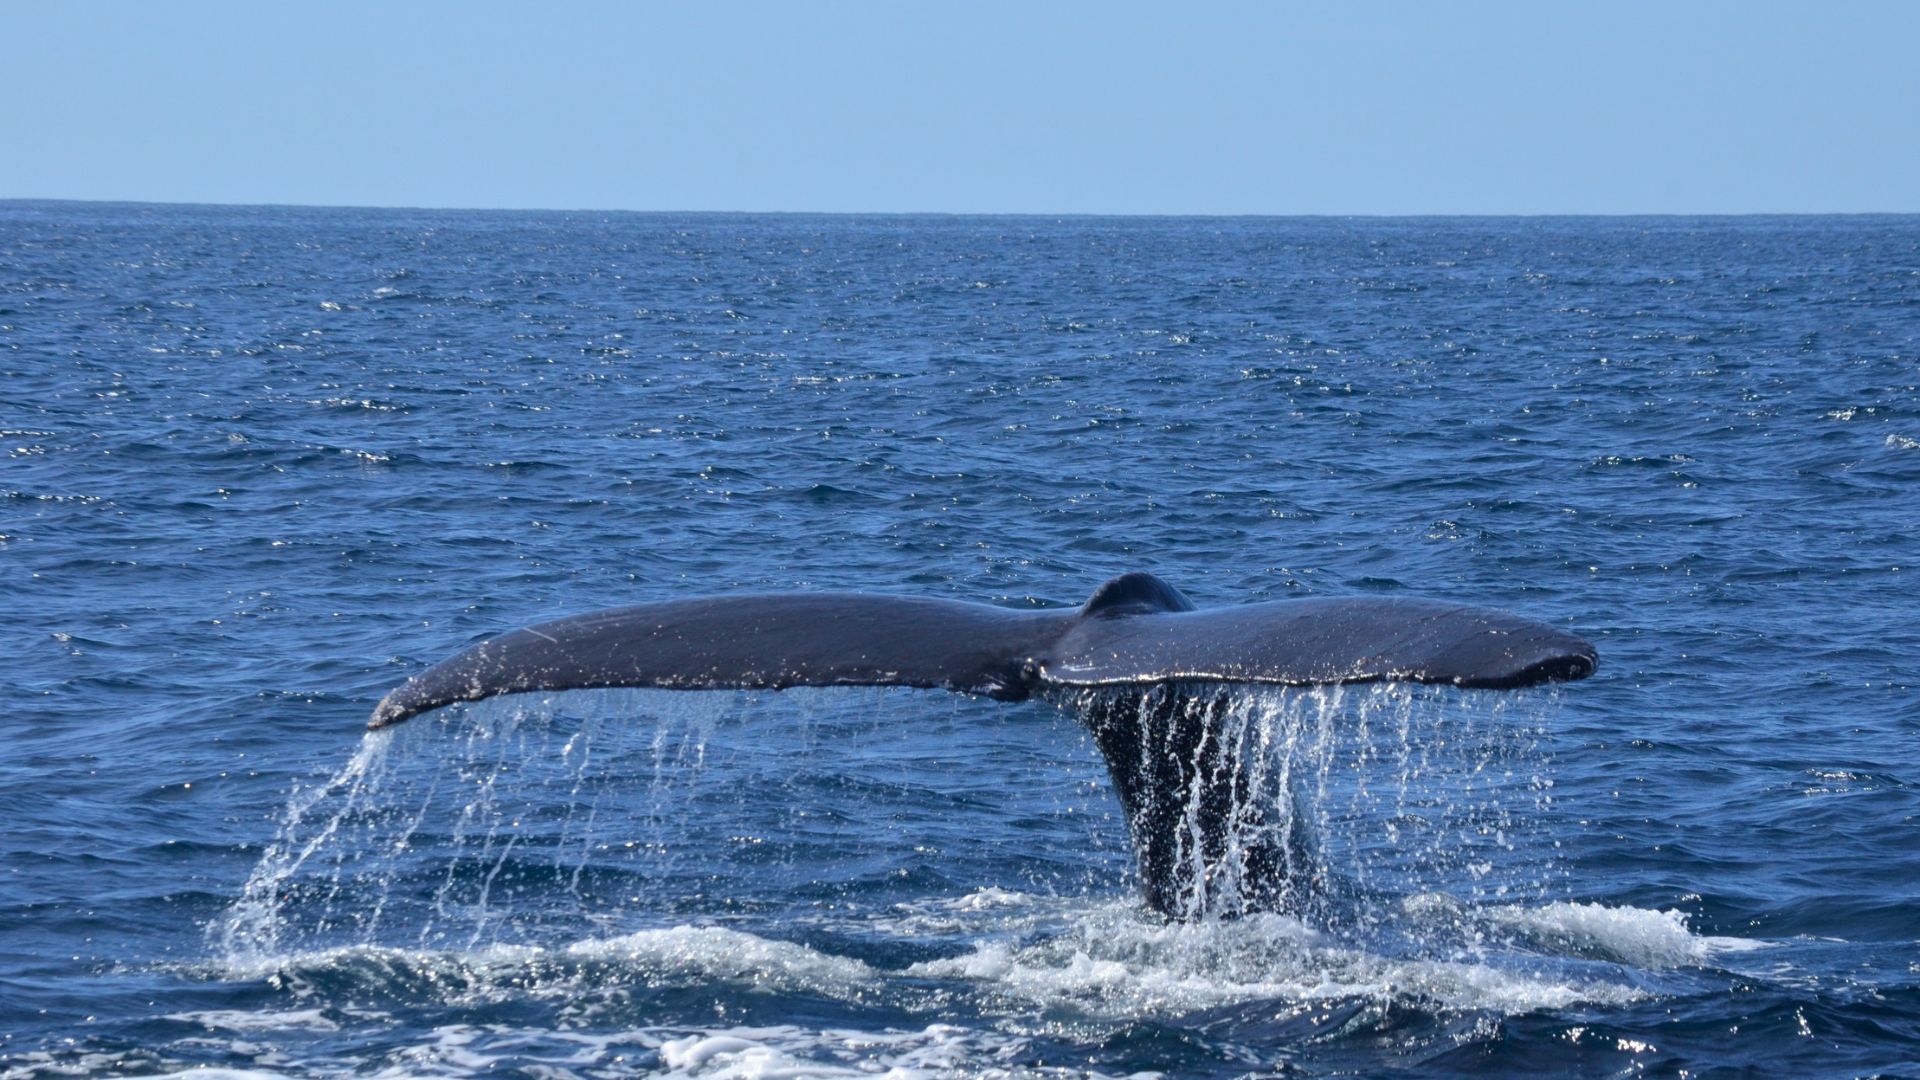 Tail of whale showing above the water